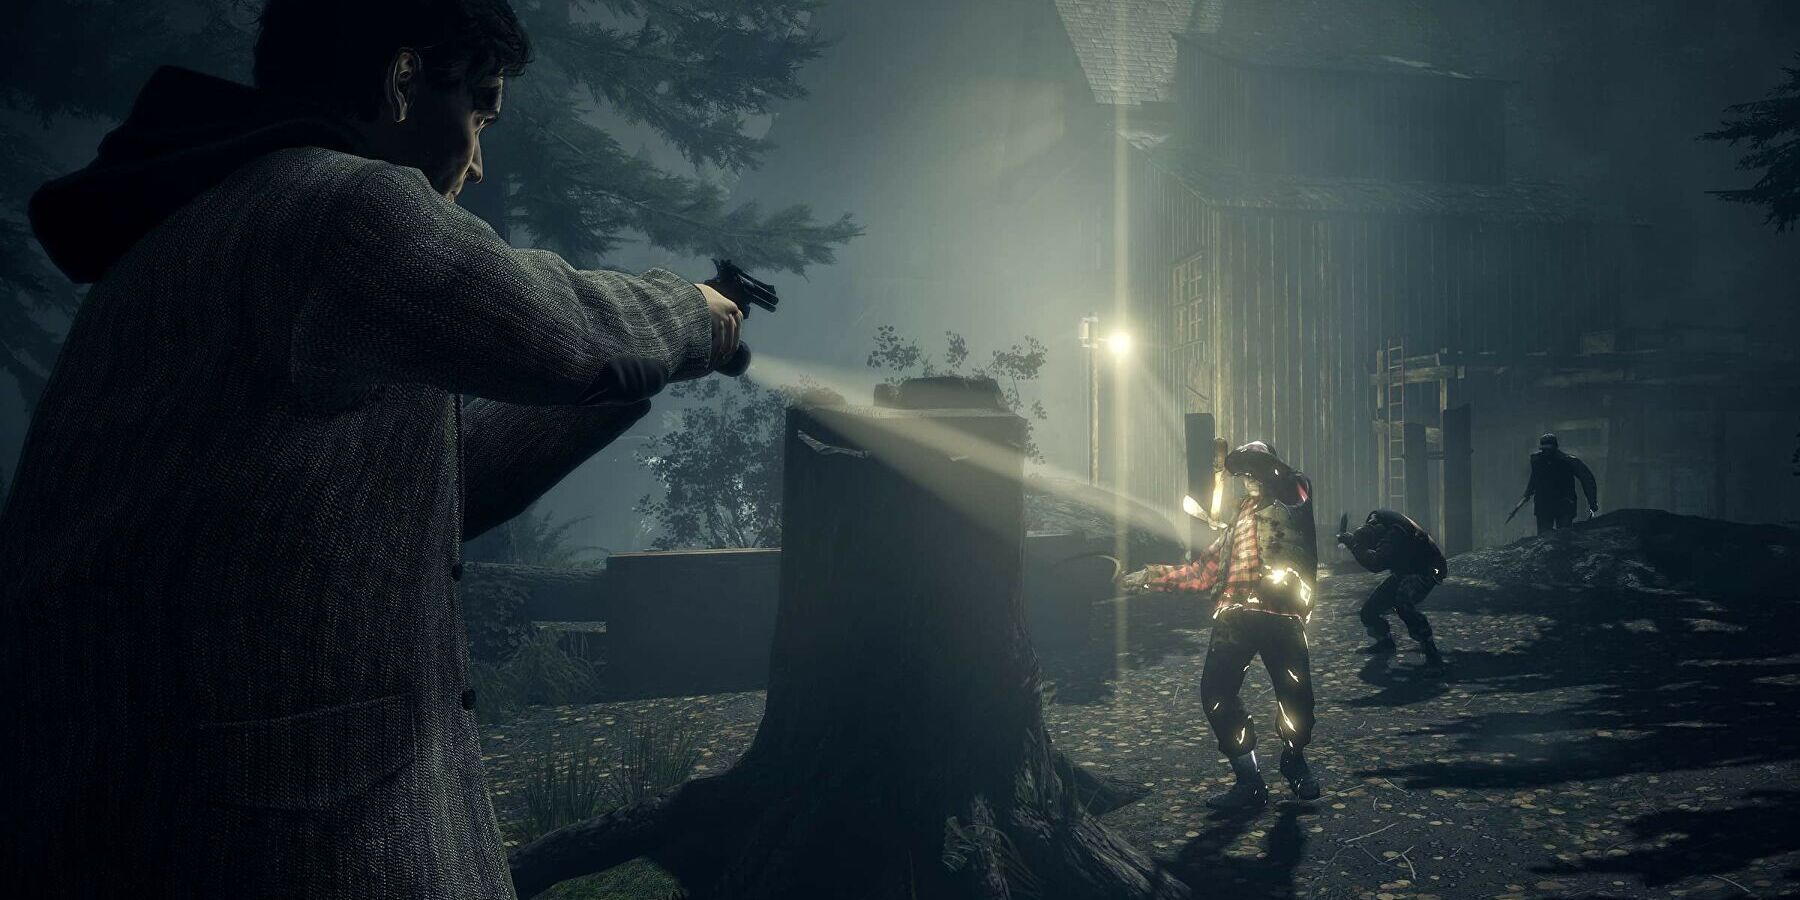 Alan Wake Remastered Developer Isn't Happy With Its
Revenue